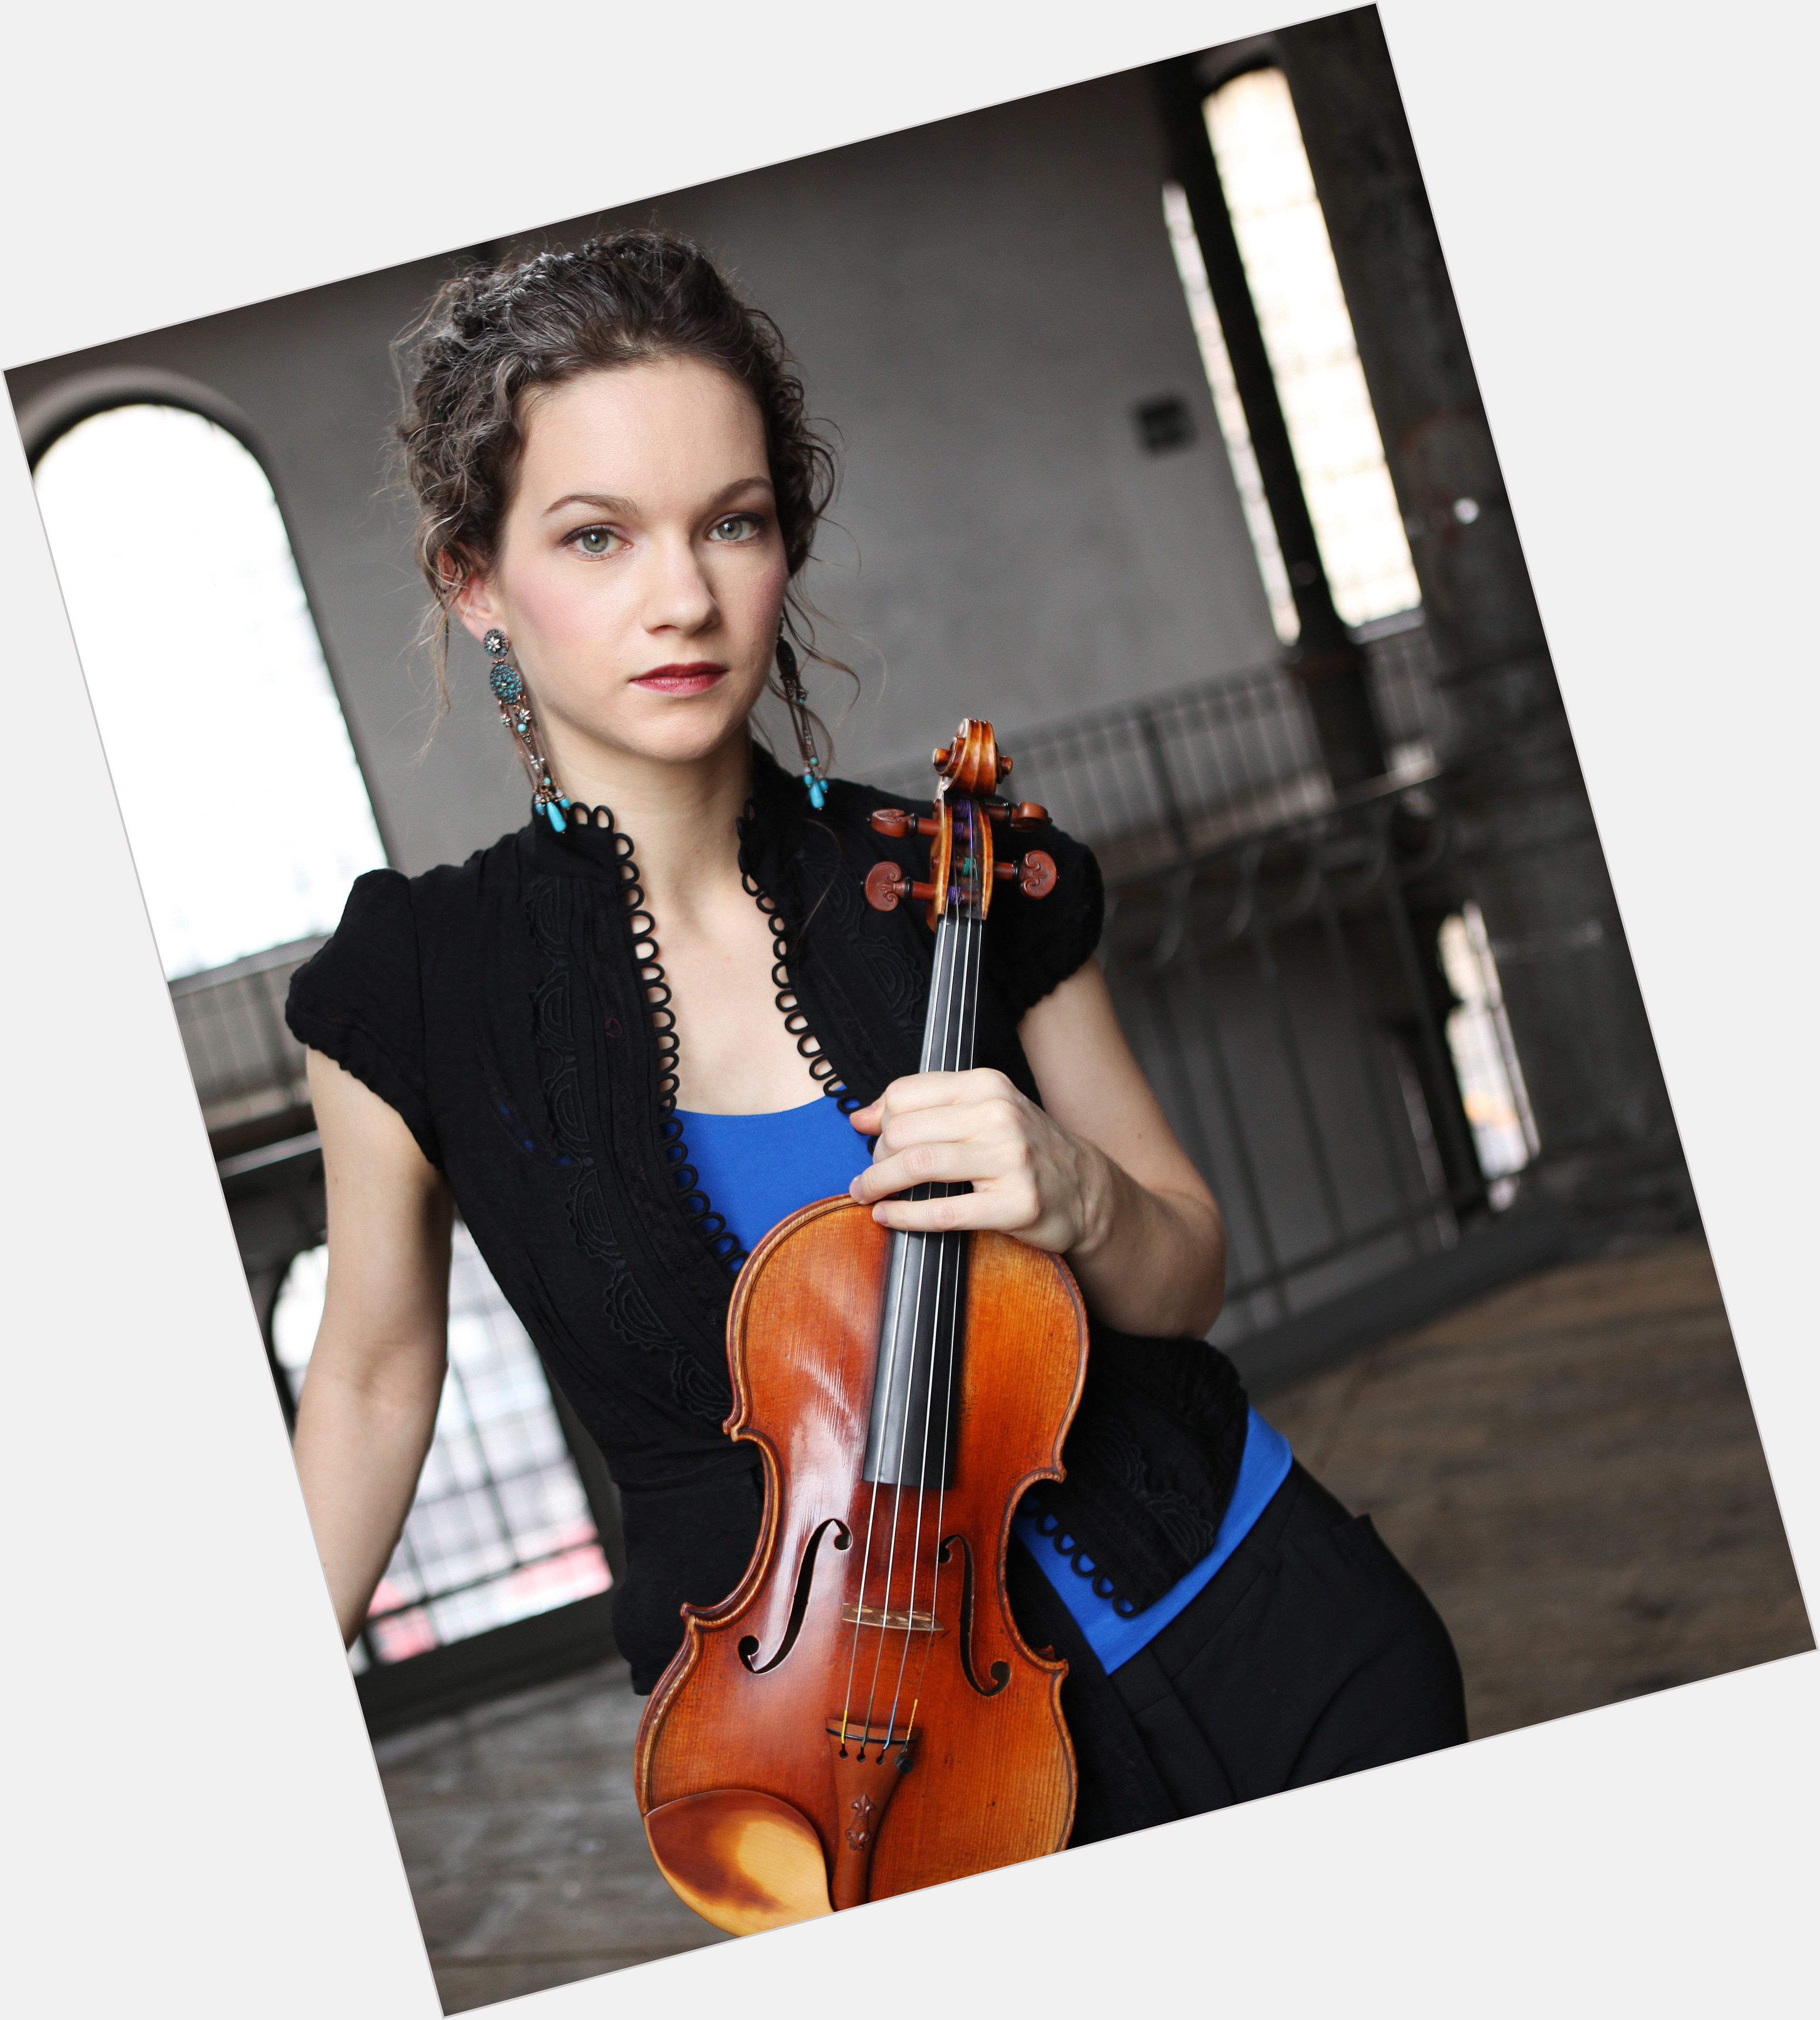 <a href="/hot-women/hilary-hahn/is-she-married-engaged">Hilary Hahn</a>  